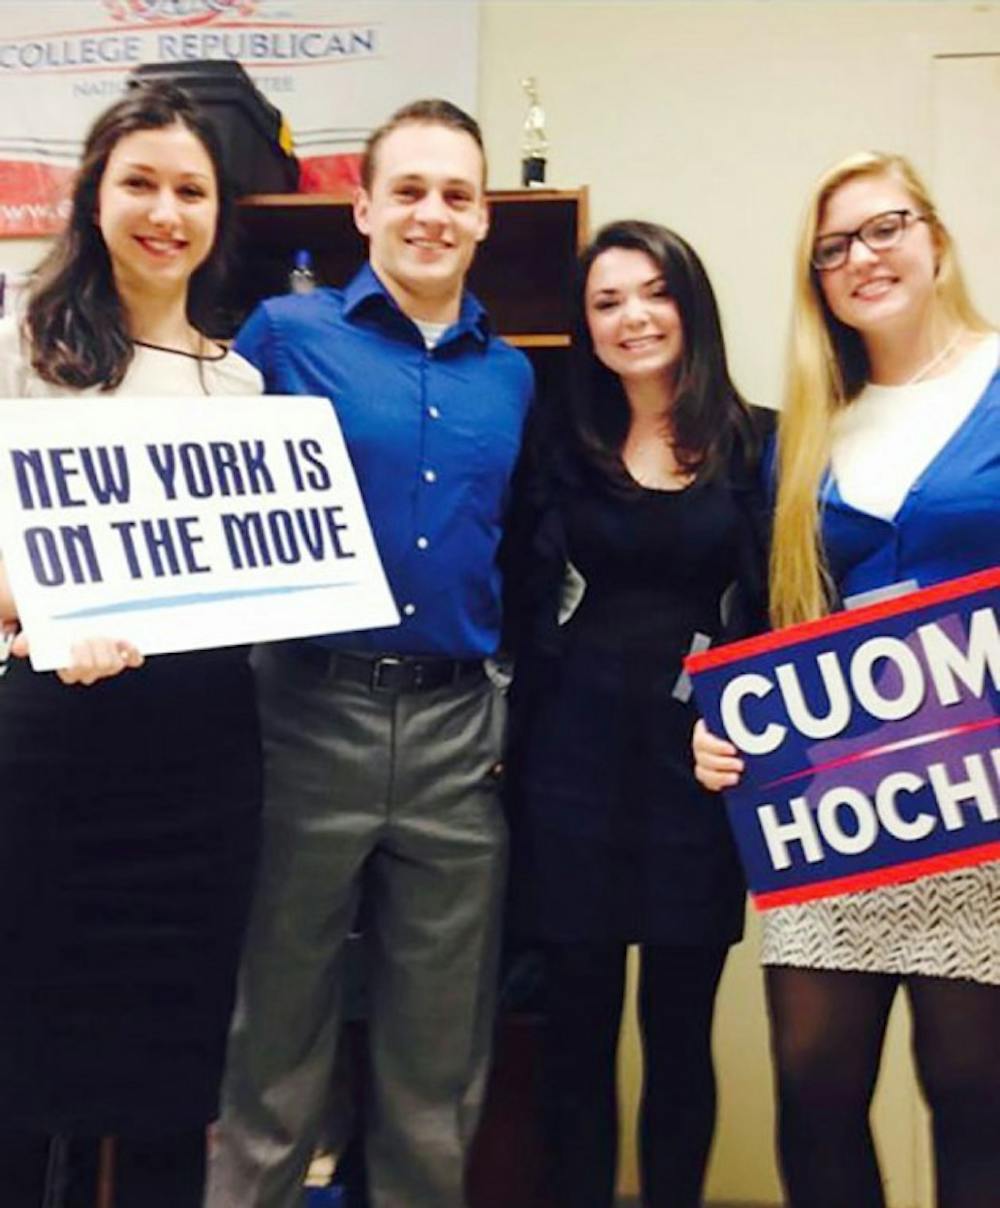 Laura Mannara (far left), president of College Democrats,&nbsp;
went with other members in her club (Sean Kaczmarek, Melissa Kathan,&nbsp;
and Carly Gottorff) to watch the gubernatorial debate watch party for&nbsp;
Gov. Andrew Cuomo.&nbsp;Curtosy of Laura Mannara